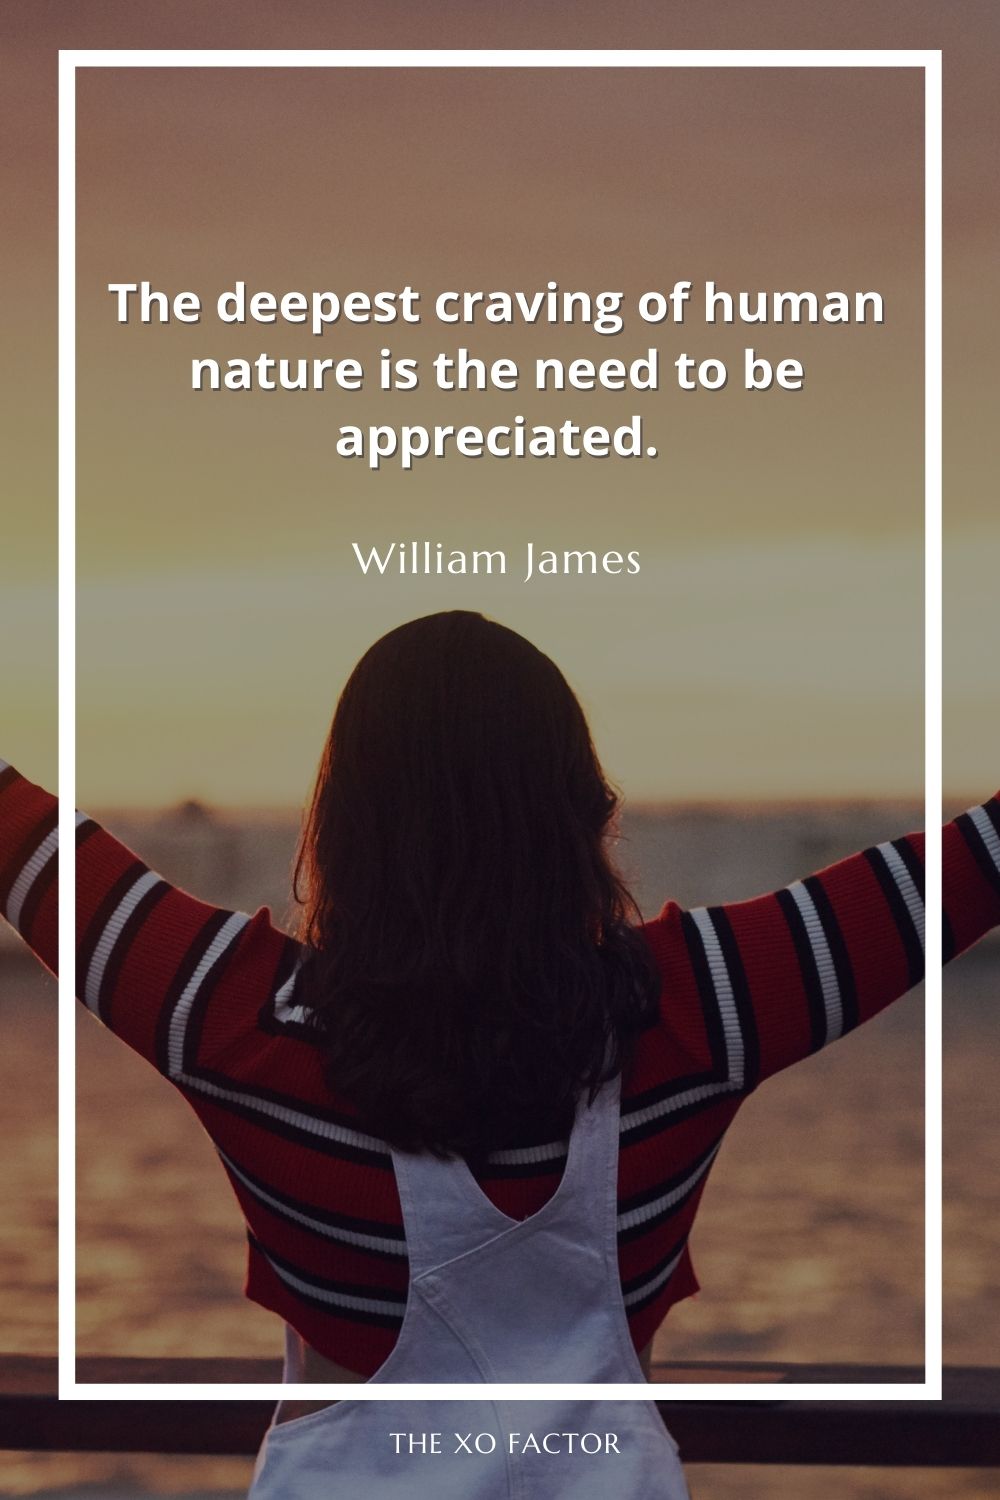 The deepest craving of human nature is the need to be appreciated.